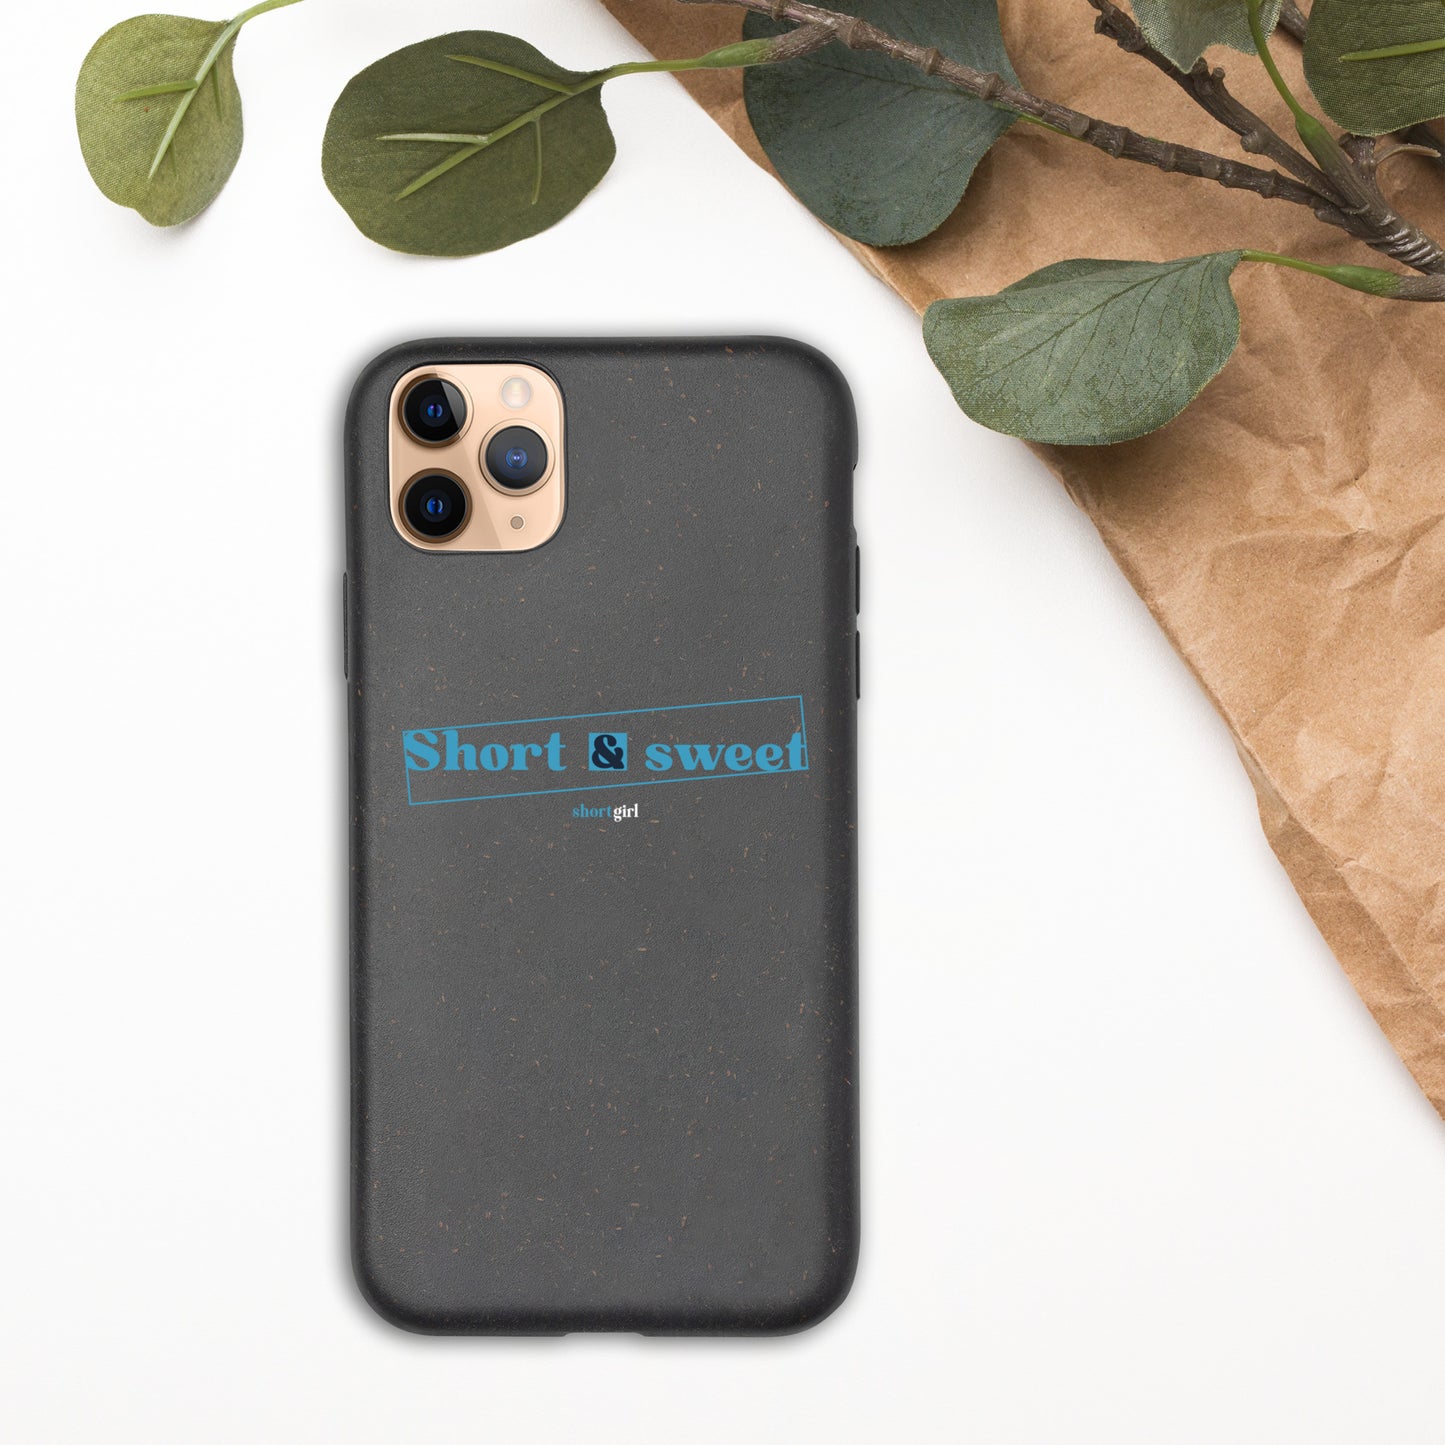 Speckled iPhone case - Short & sweet